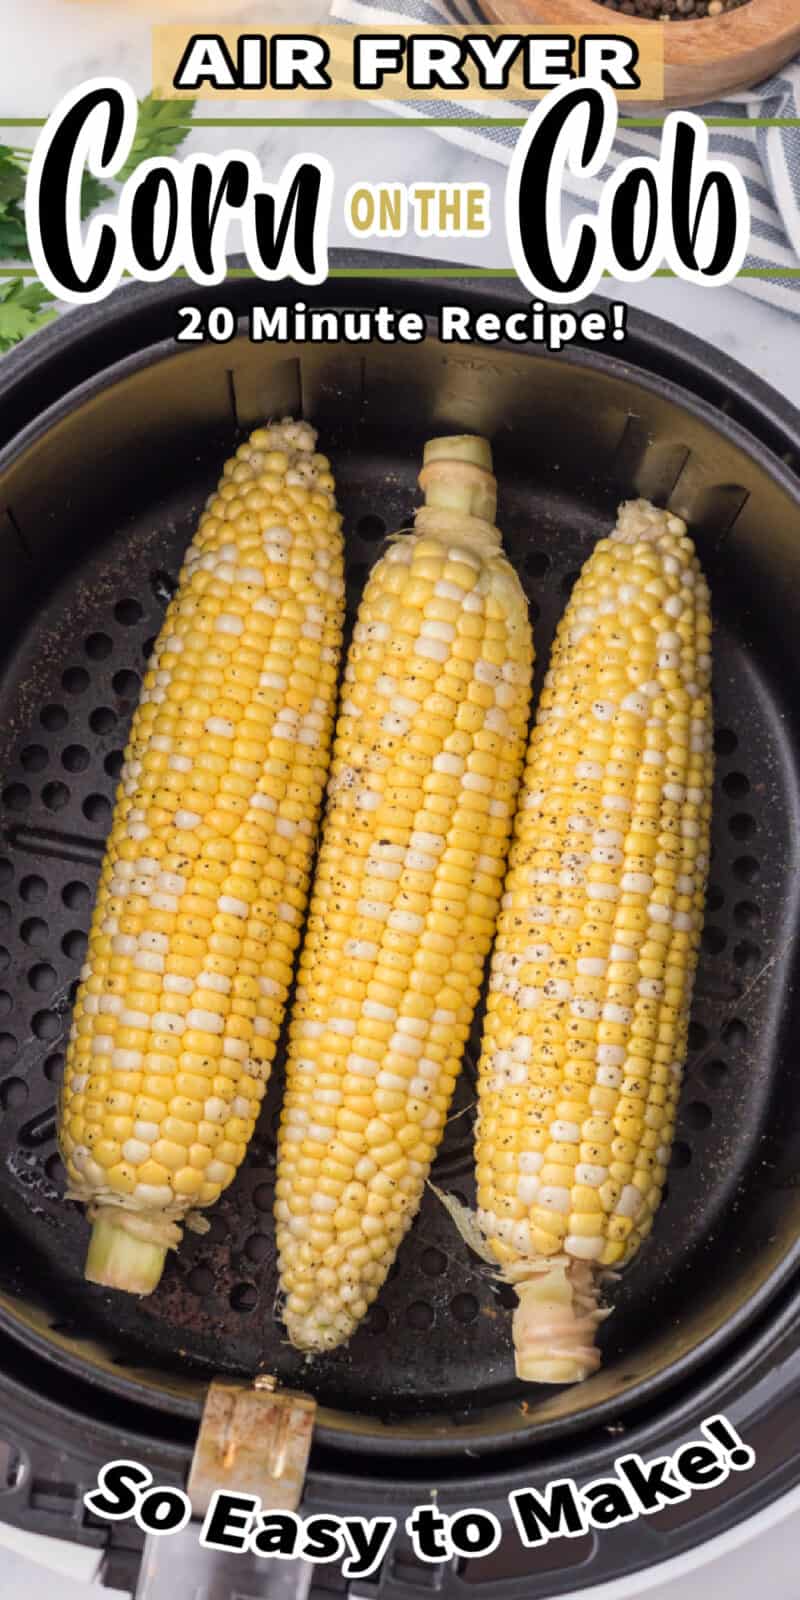 corn on the cob in an air fryer basket with text